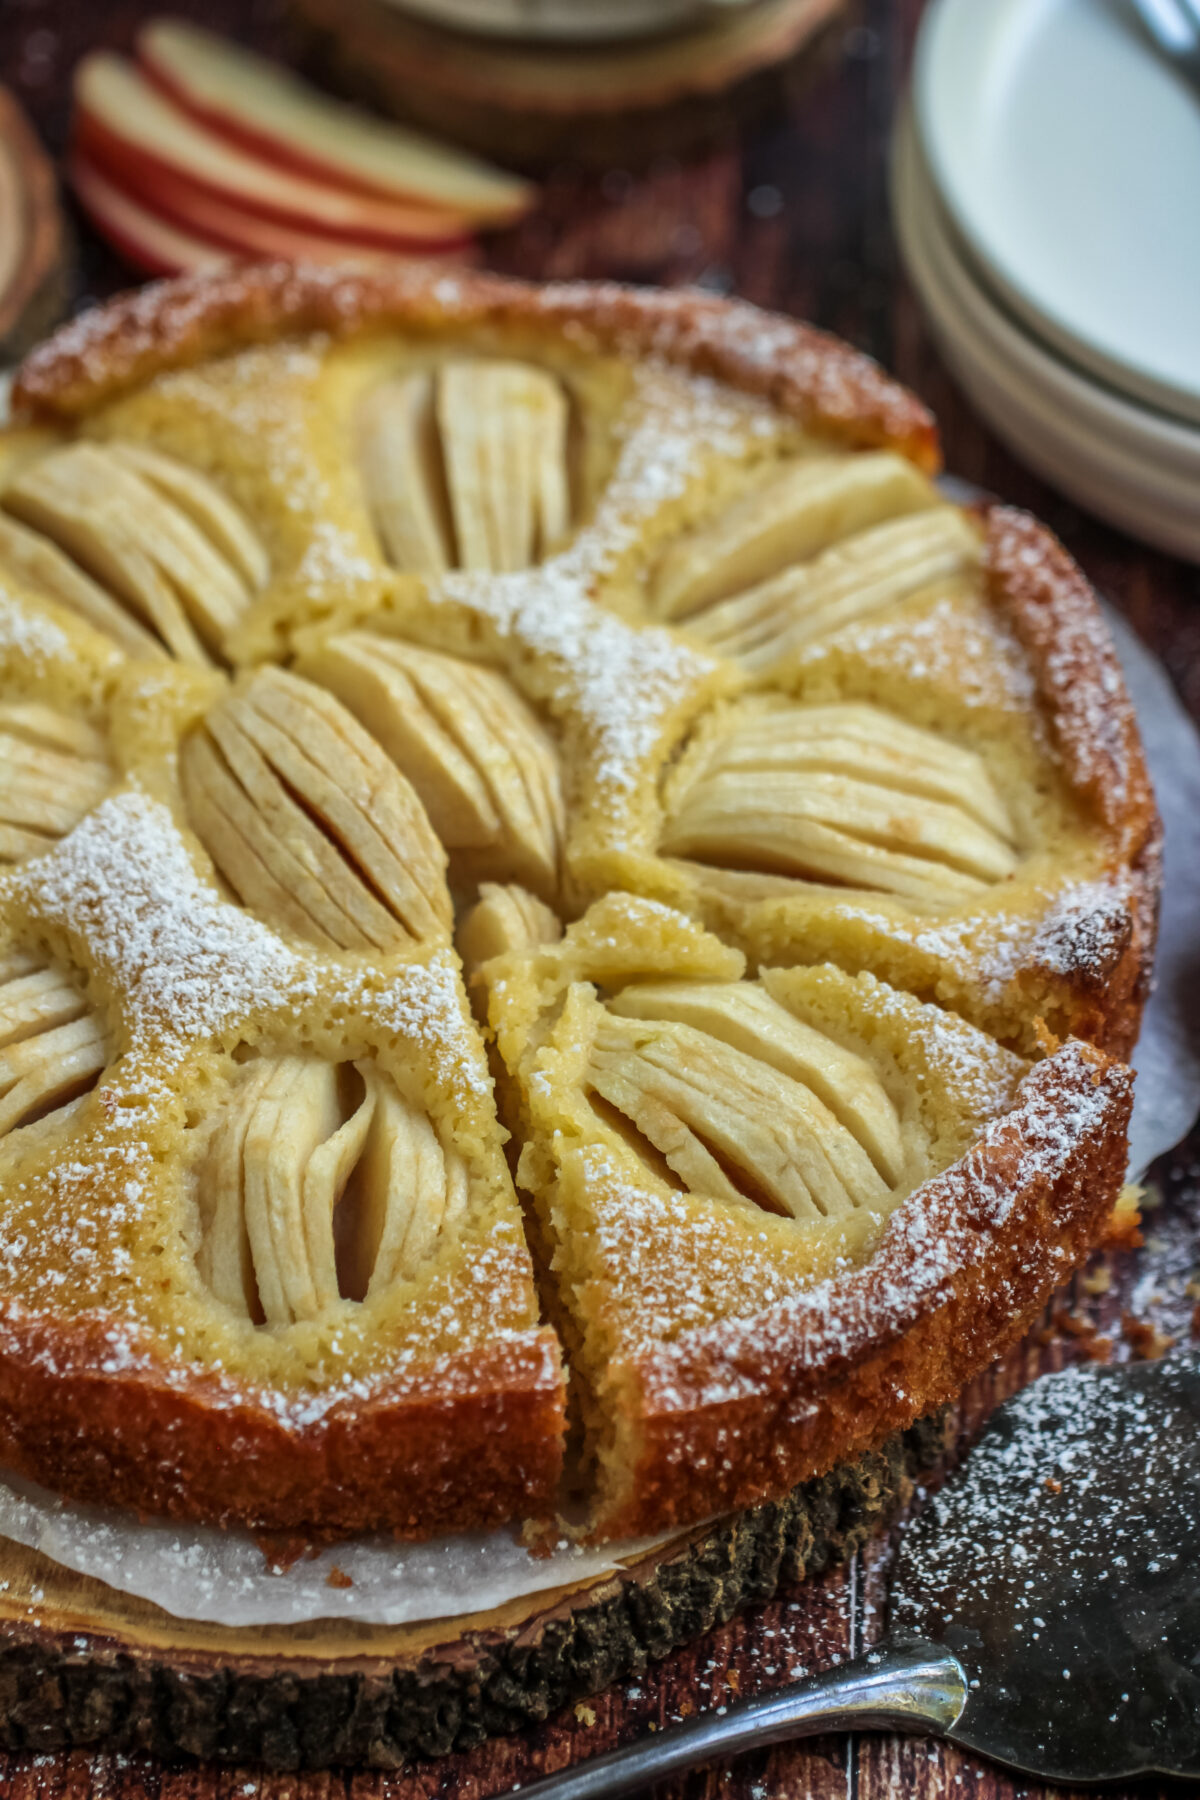 Classic German apple cake, Apfelkuchen, is moist and buttery. It's a simple and rustic cake made with fresh apples - a perfect fall dessert.